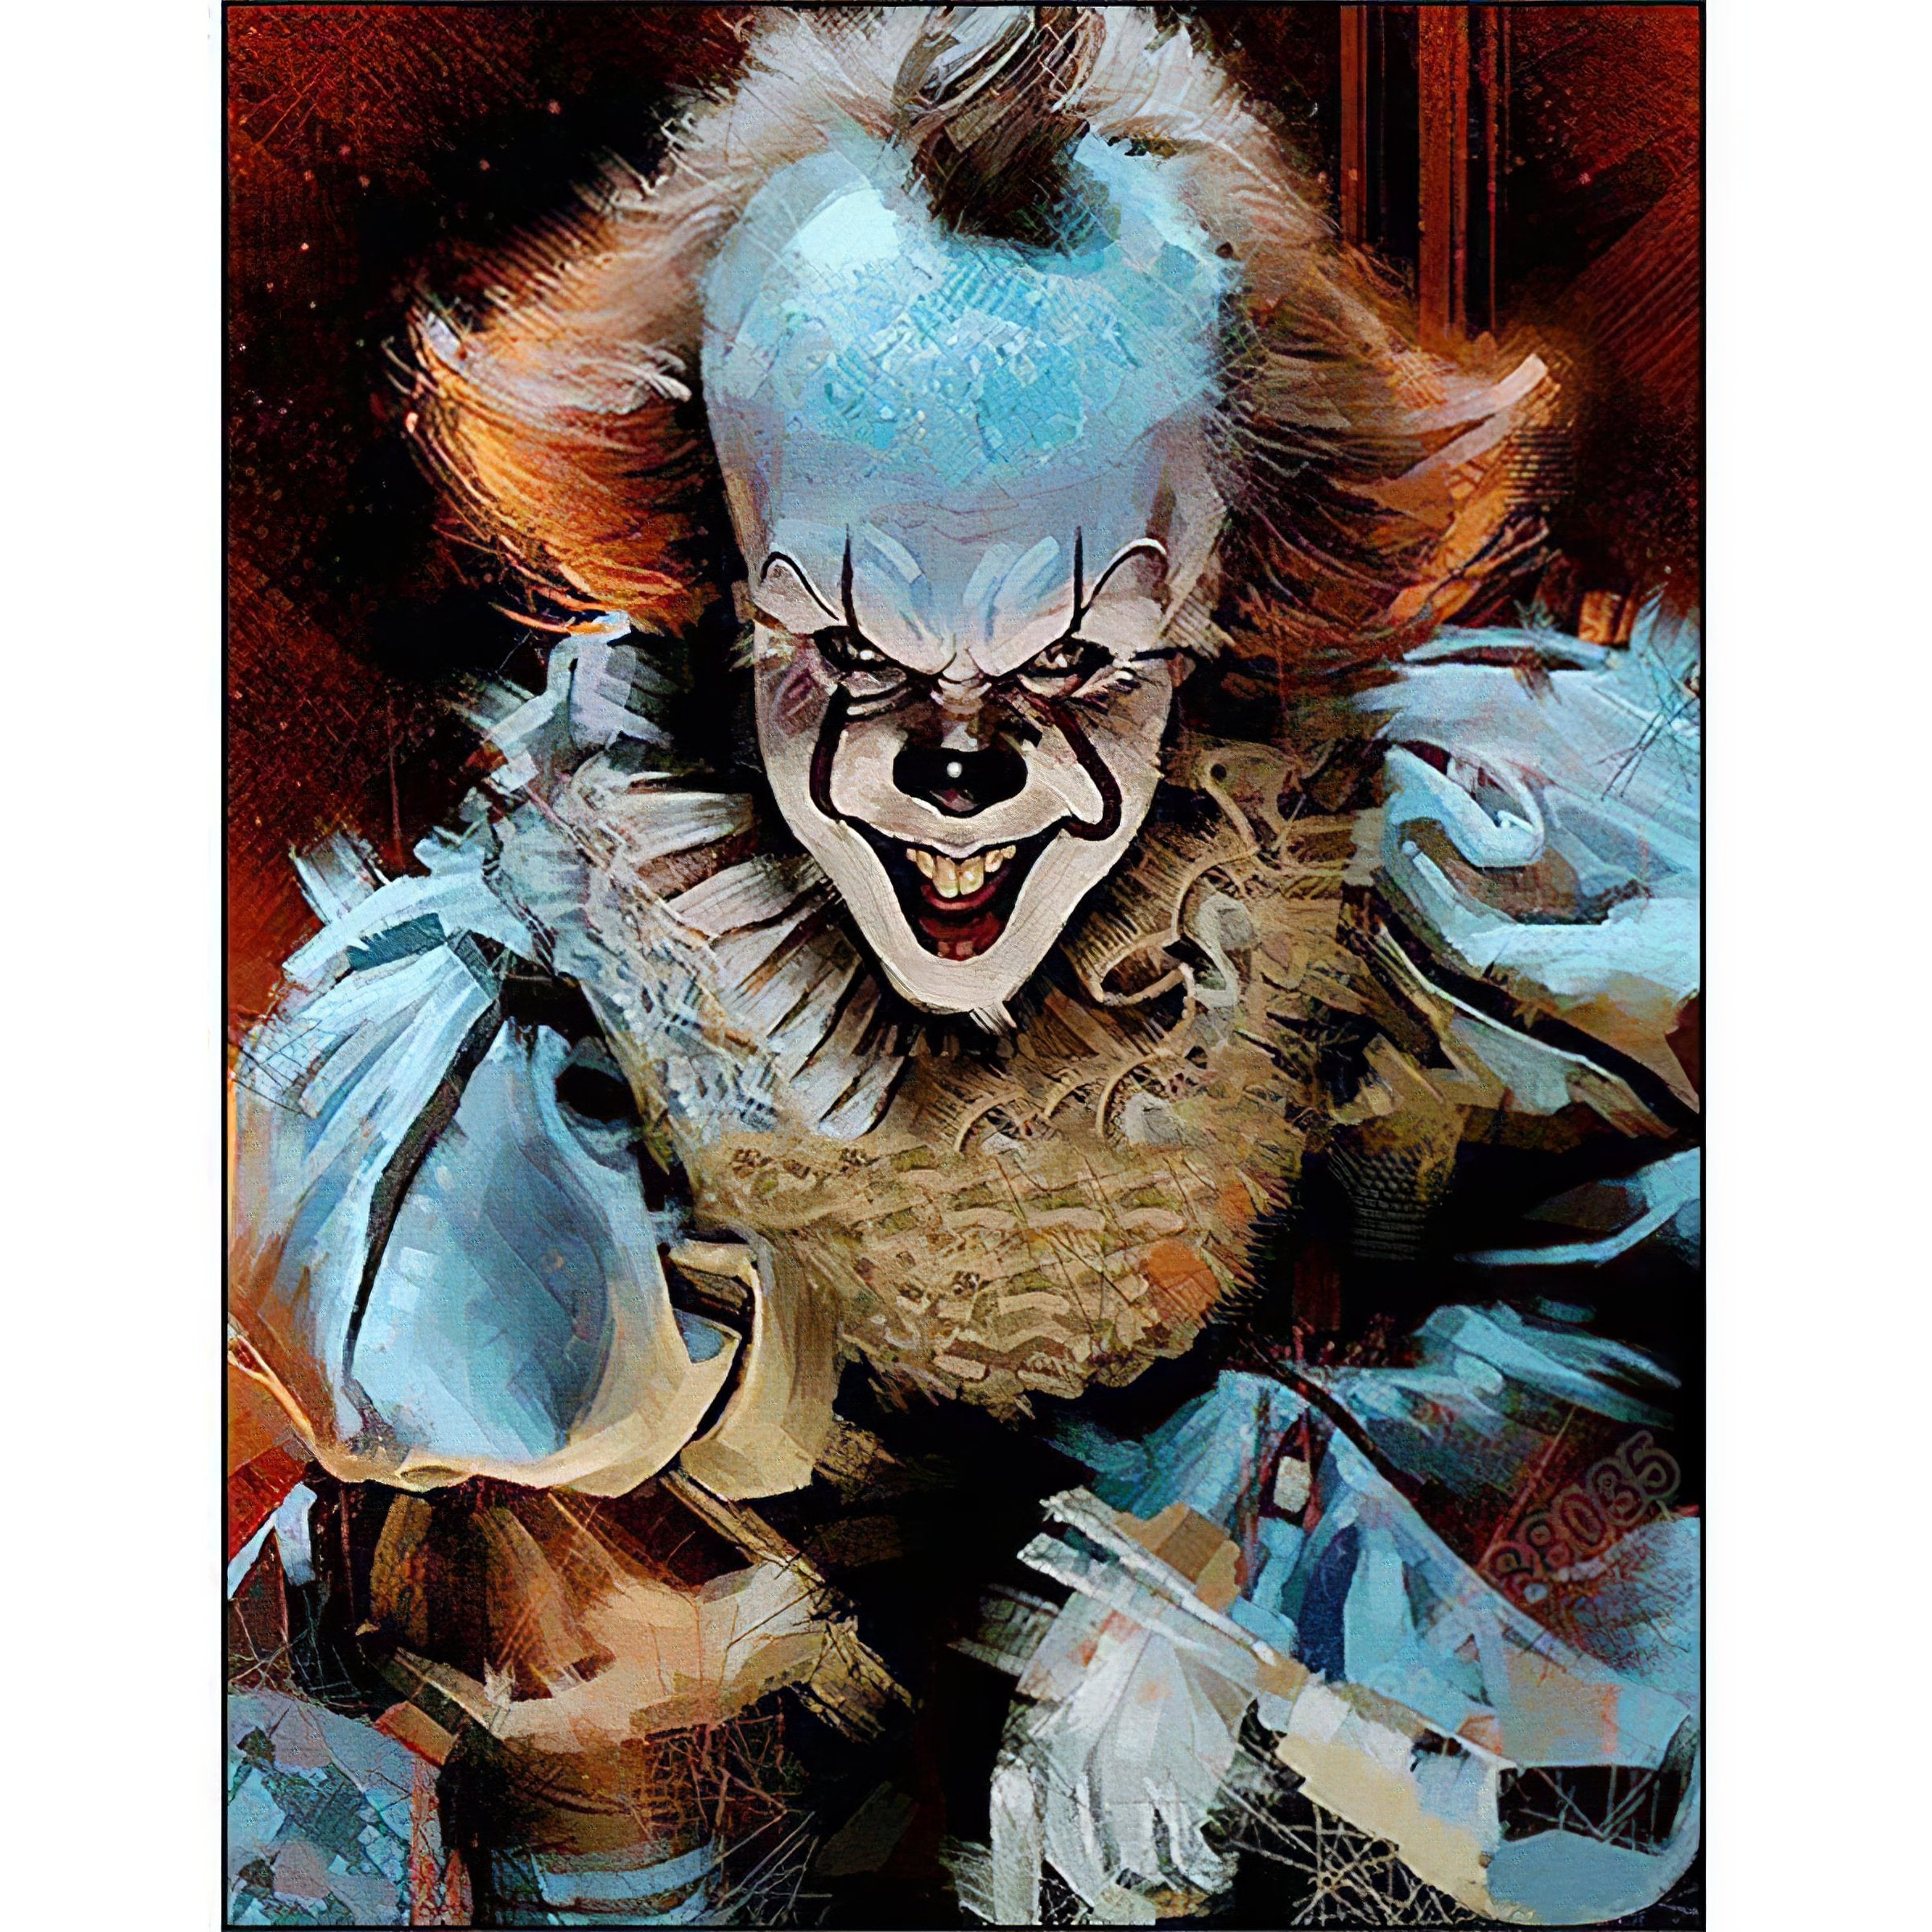 Feel the chill with Pennywise in this haunting artwork.It Pennywise - Diamondartlove